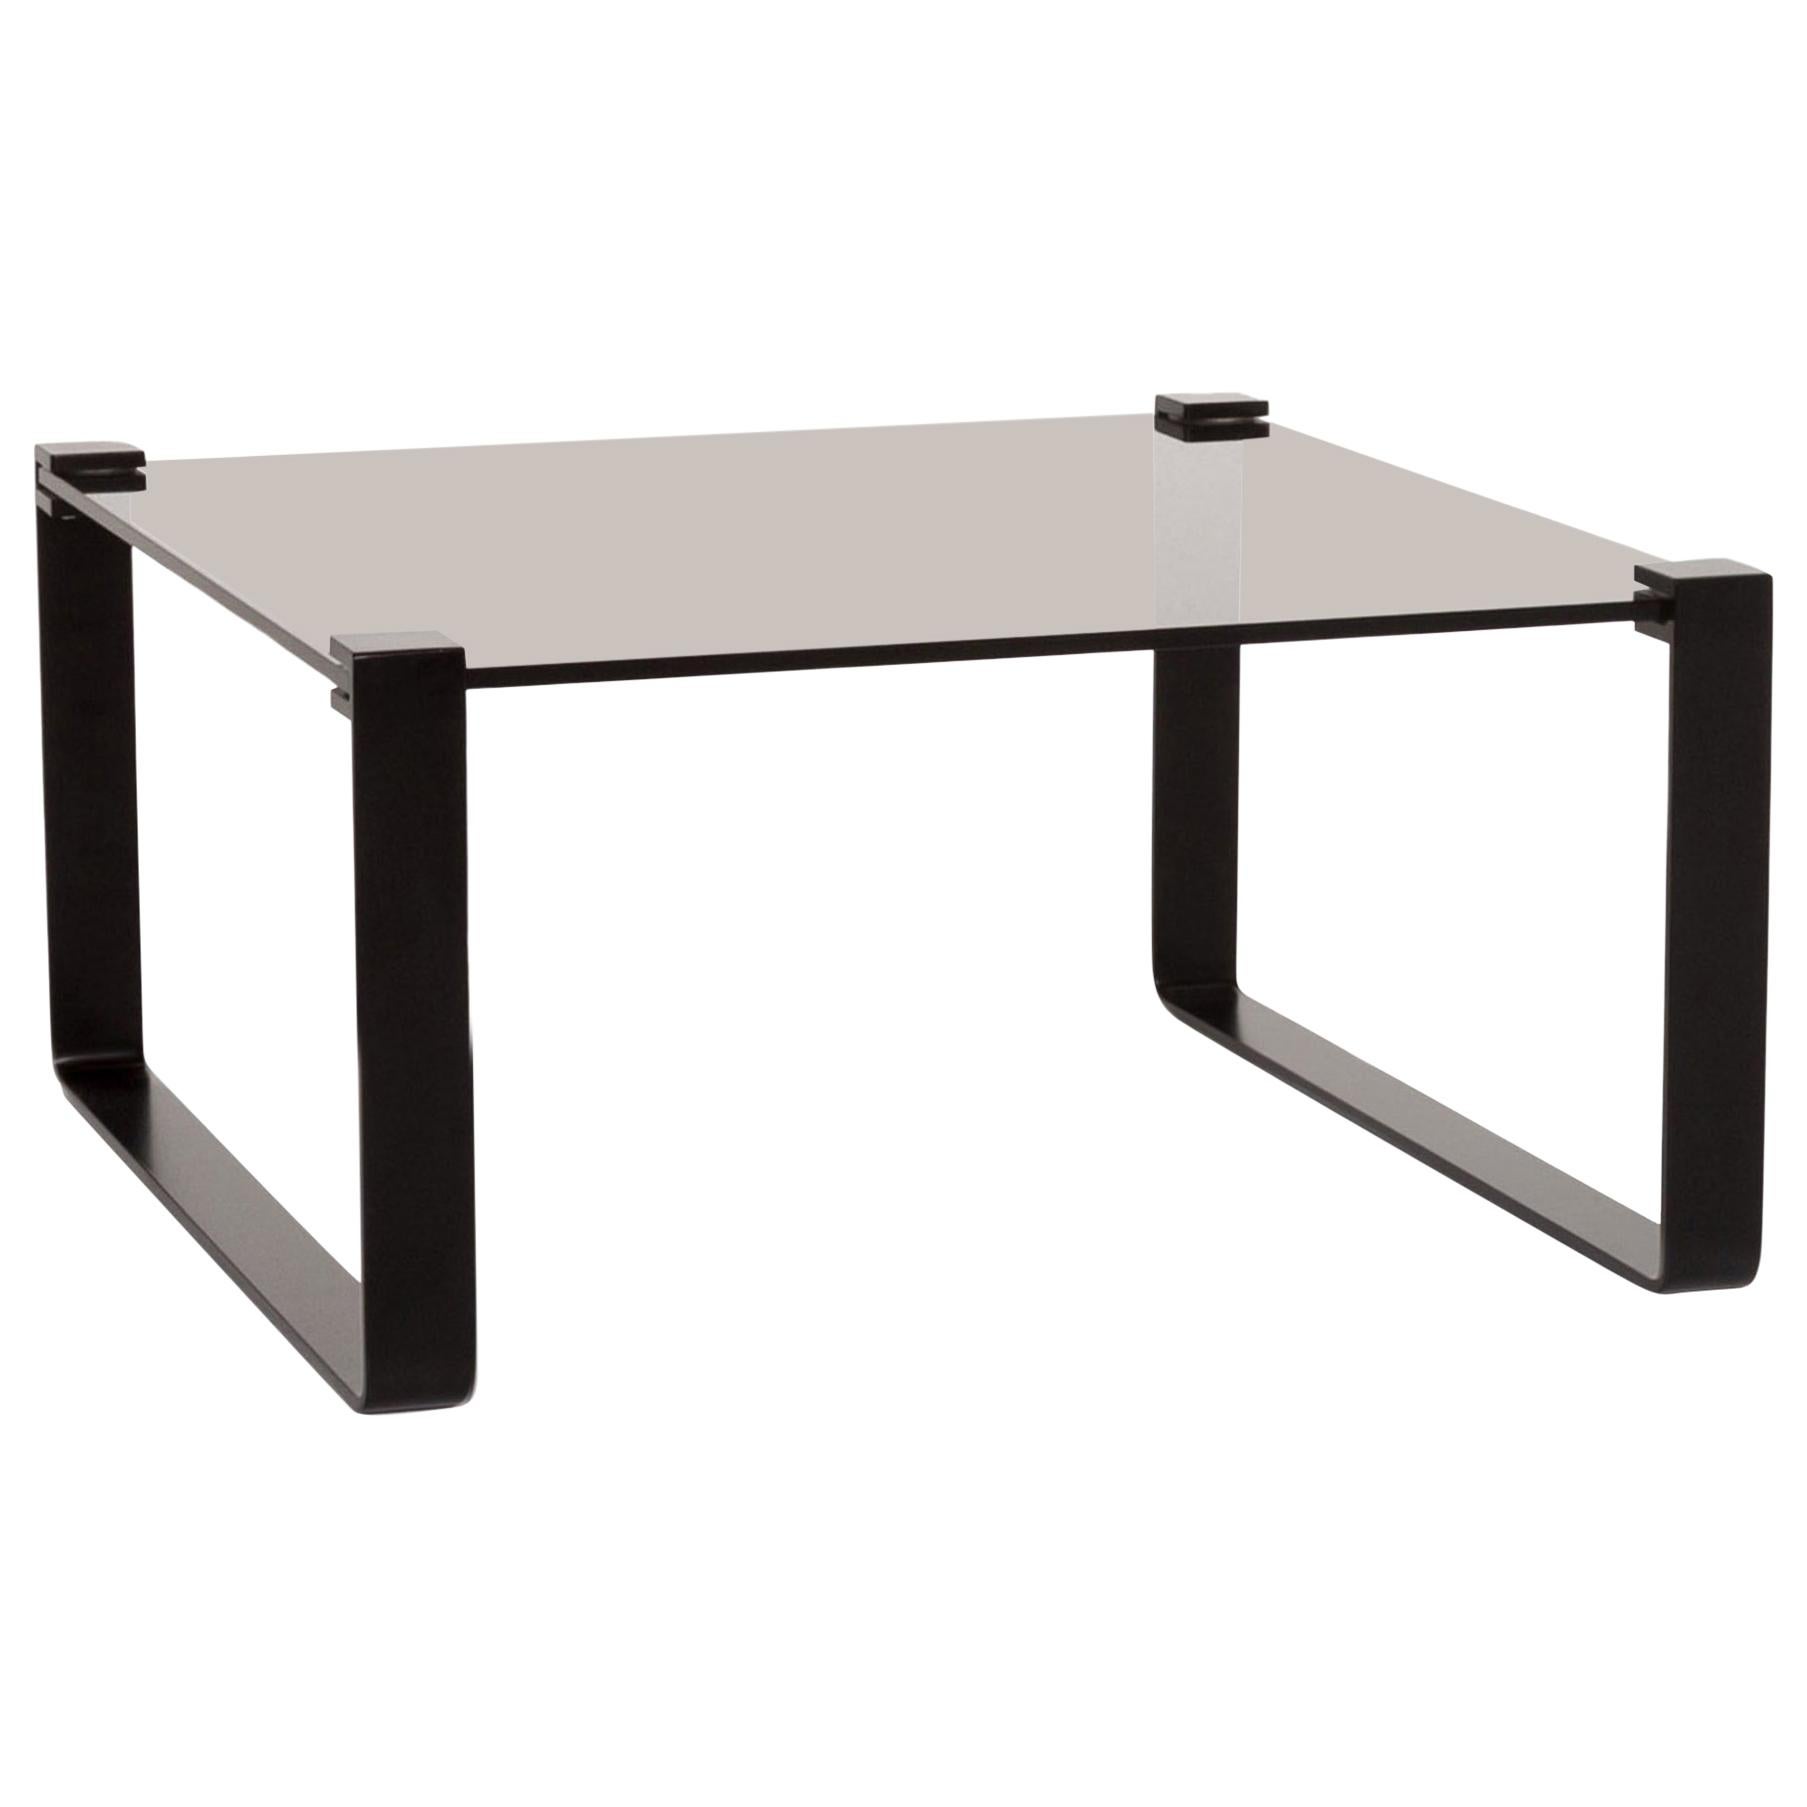 Ronald Schmitt K 830 Glass Coffee Table Gray Anthracite Table For Sale